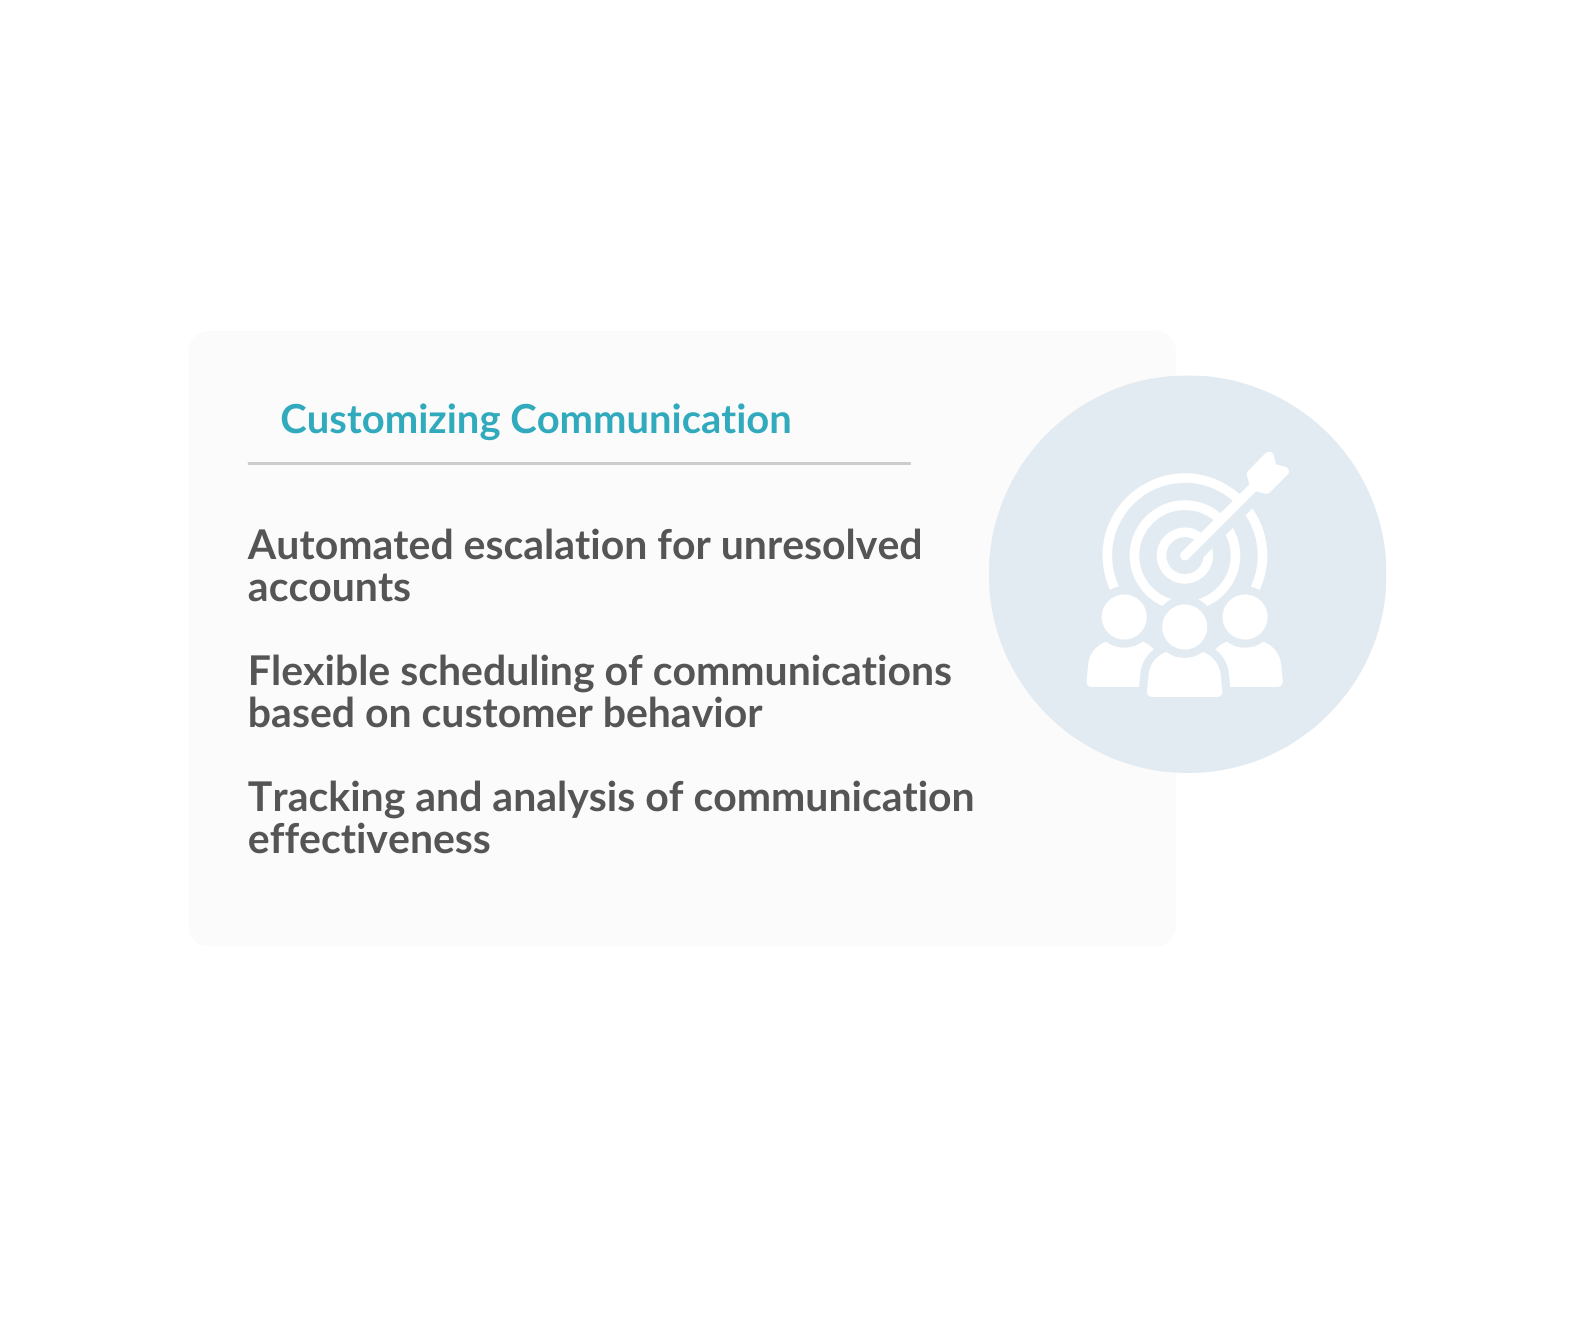 Customizing Communication for Better Results